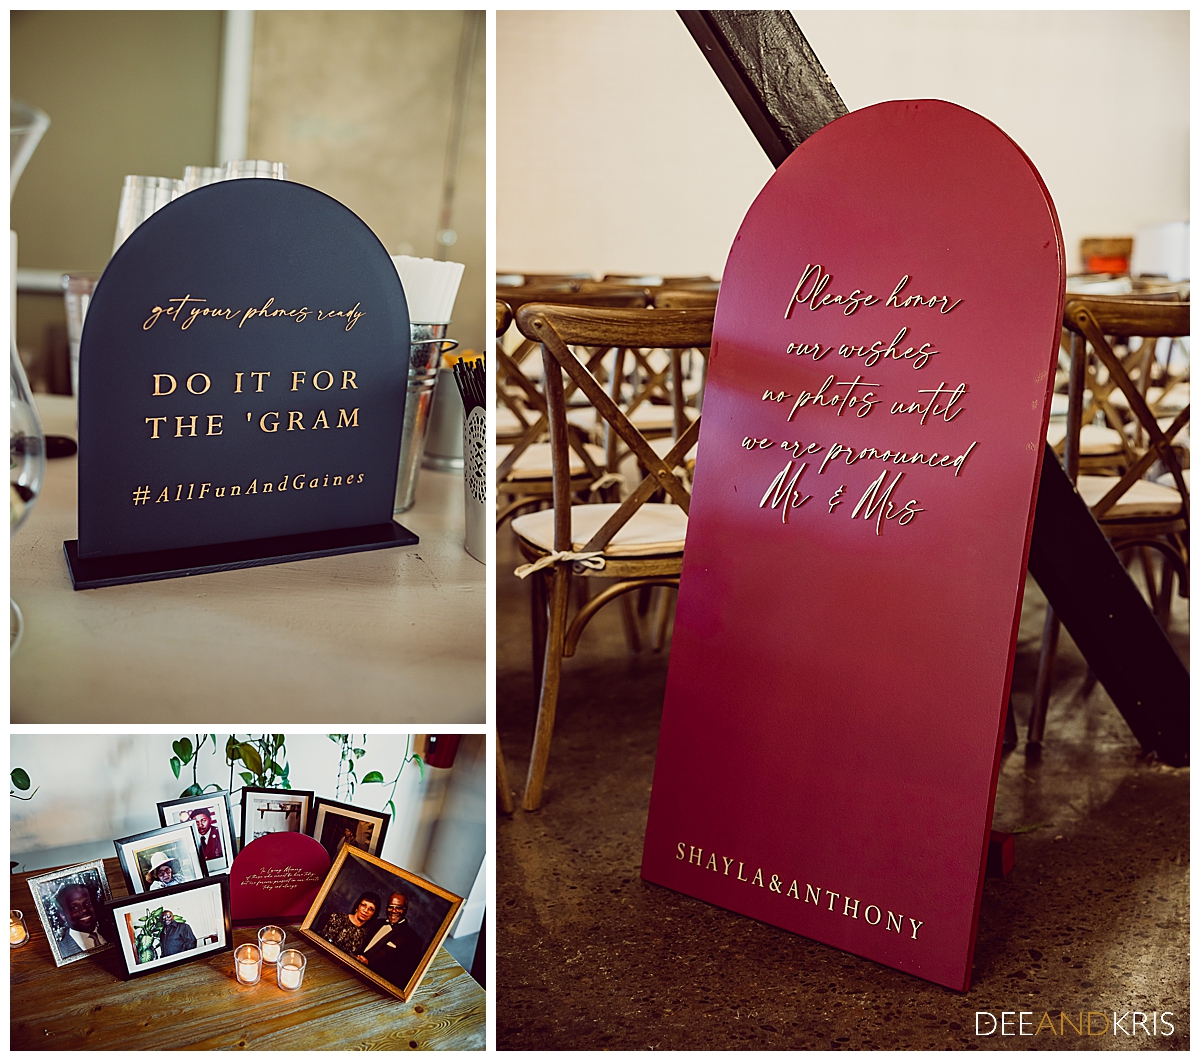 Three images: Tope left image of sign for Instagram photos with couple's hashtag. Bottom left image of memorial table with pictures of loved ones. Right image of seating sign,